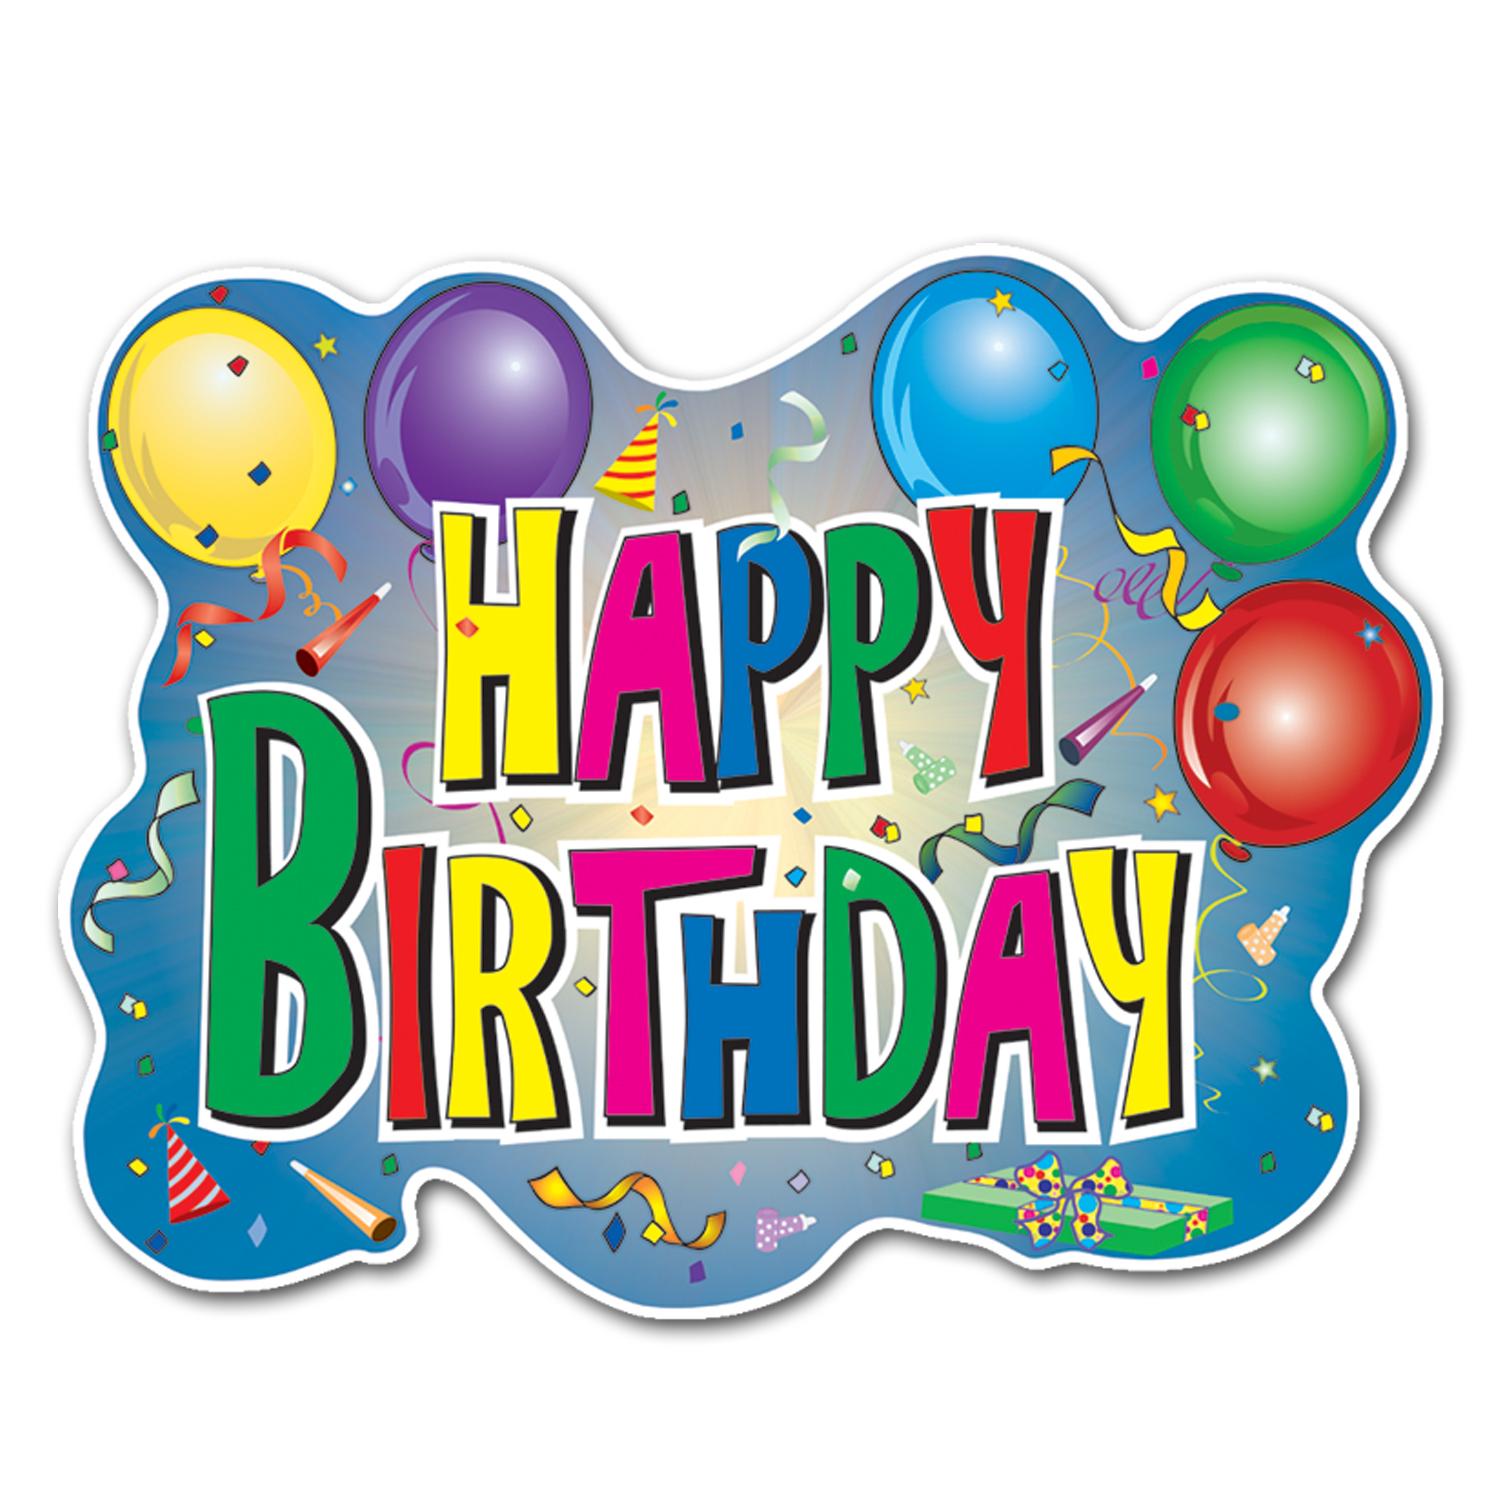 Birthday Printable Images Gallery Category Page 26